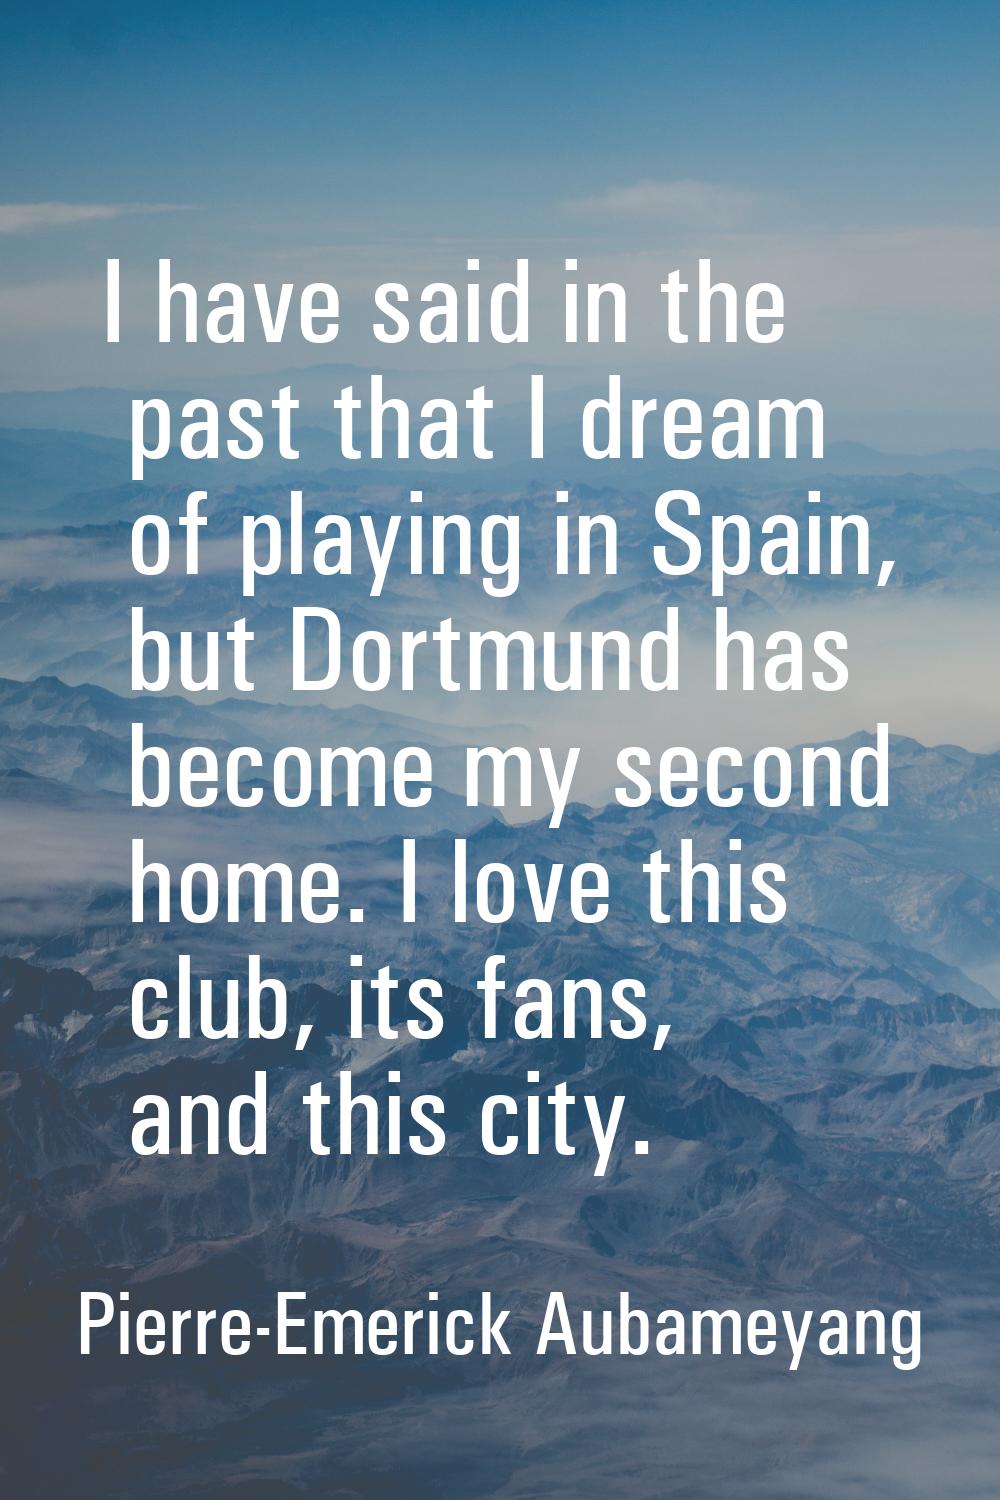 I have said in the past that I dream of playing in Spain, but Dortmund has become my second home. I